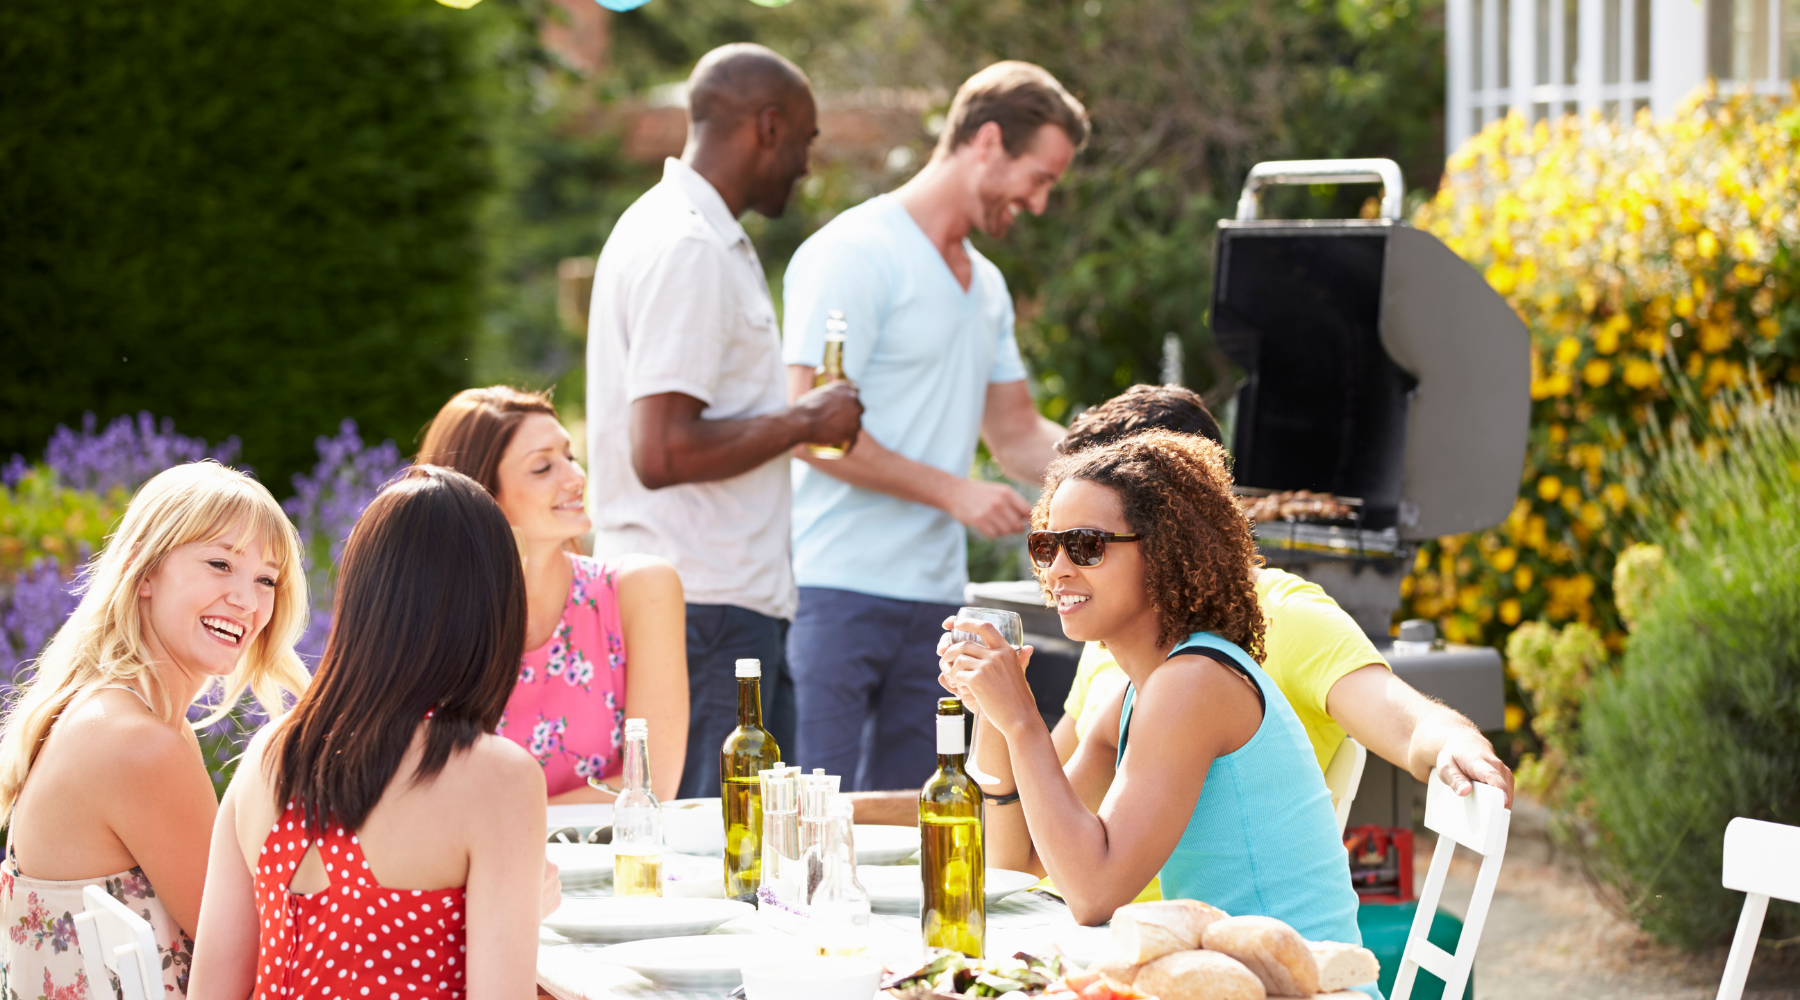 British Summertime Begins! Here's a Breakdown of the Best Types of BBQs